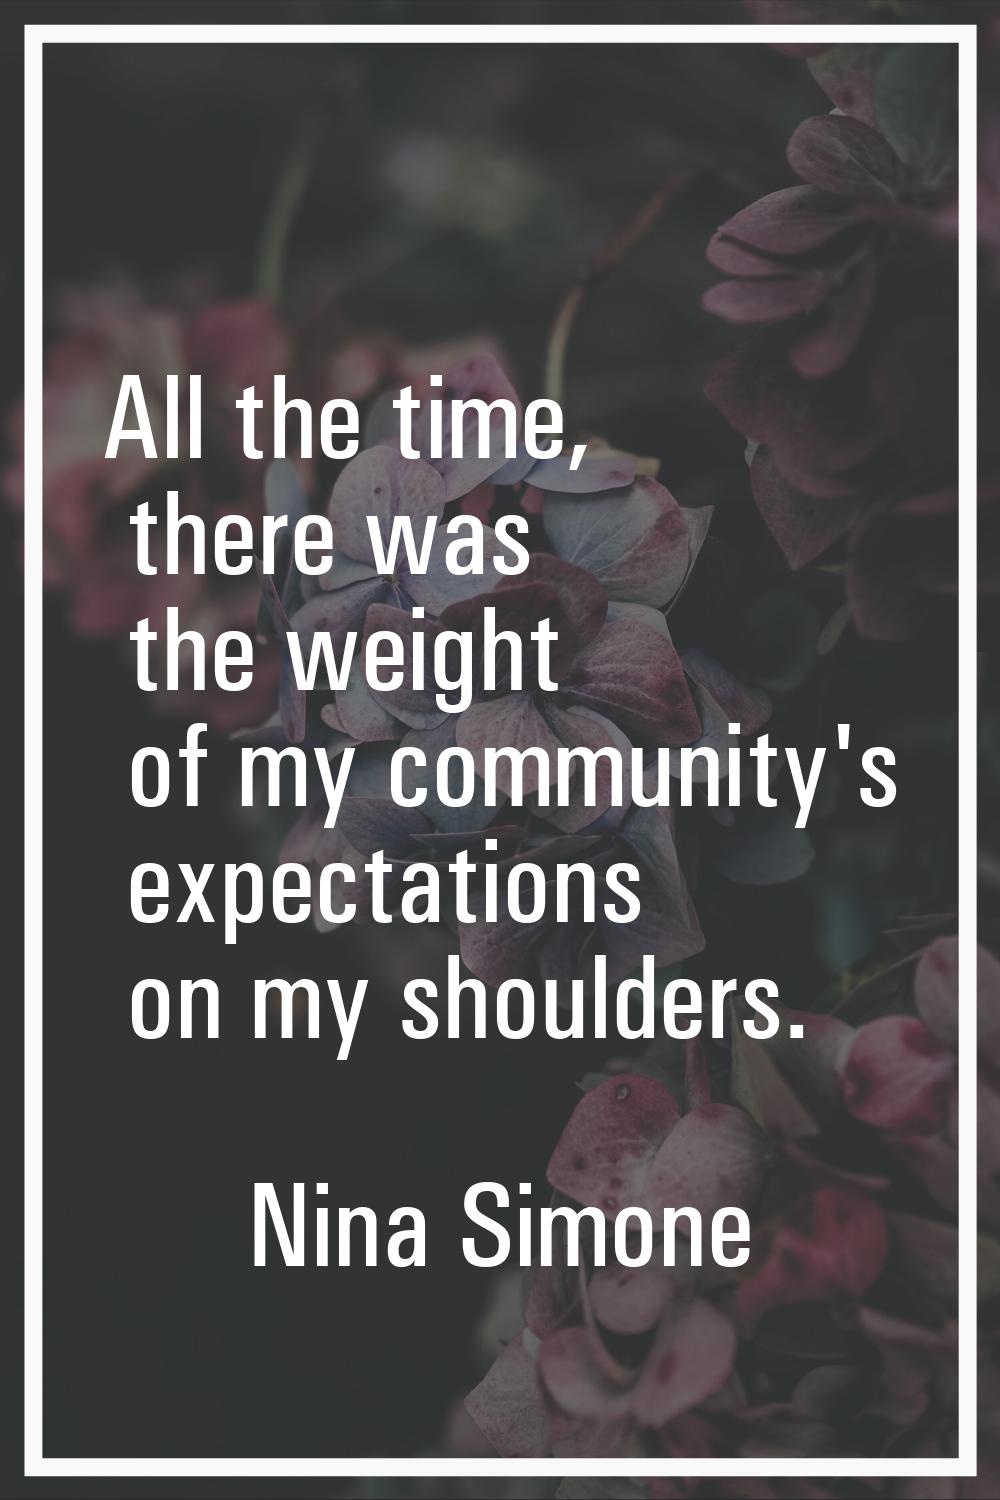 All the time, there was the weight of my community's expectations on my shoulders.